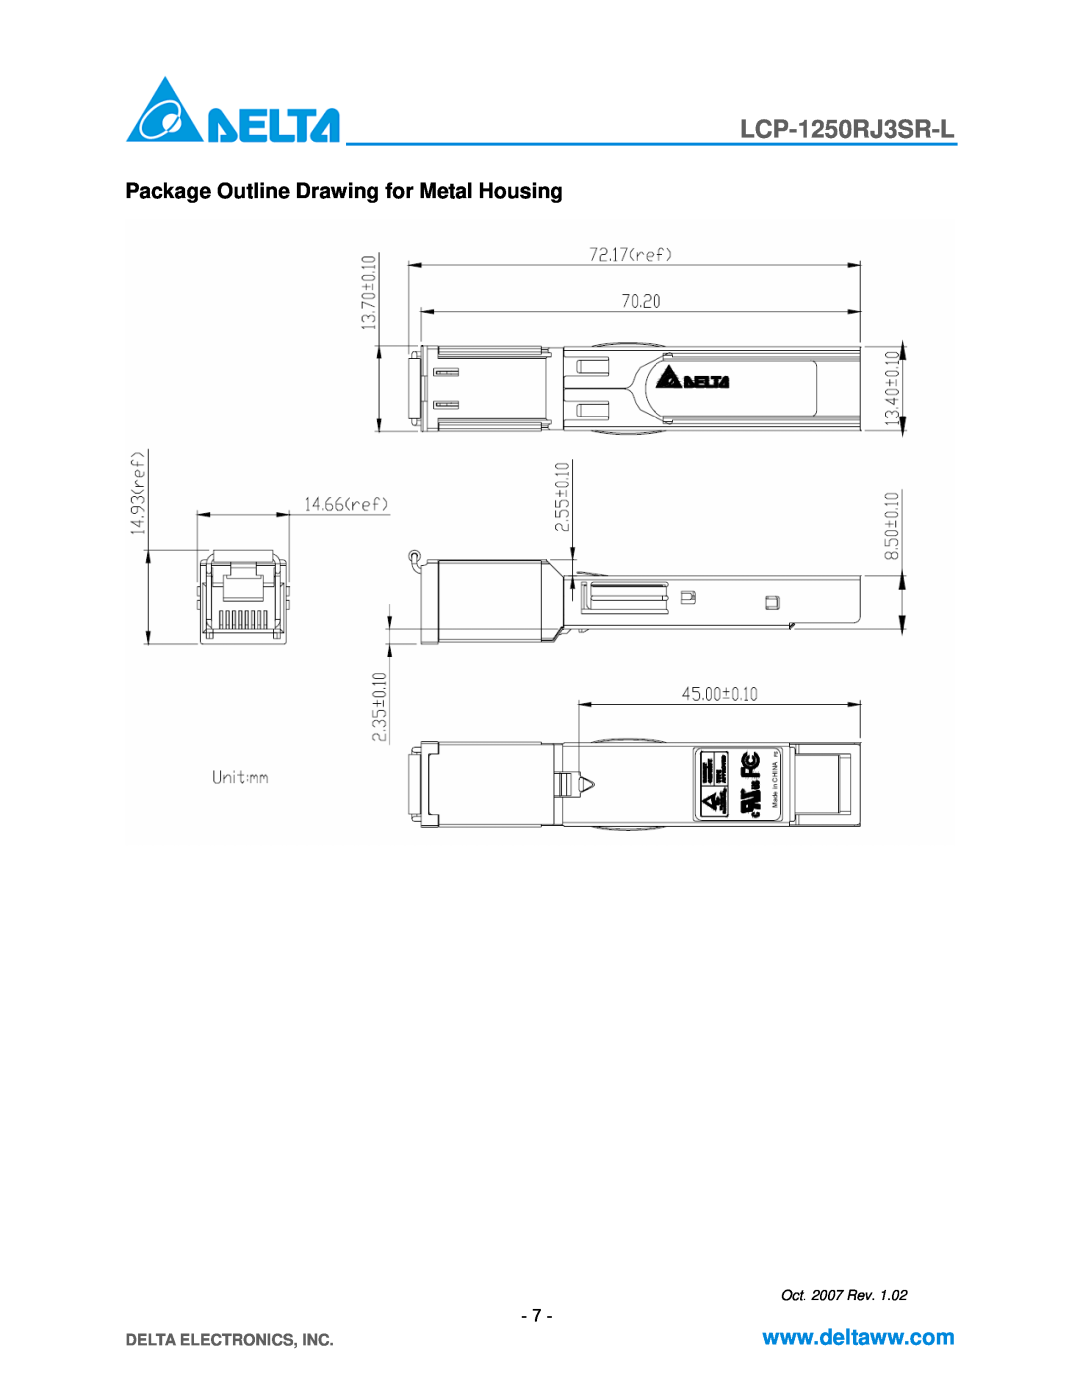 Delta Electronics LCP-1250RJ3SR-L Package Outline Drawing for Metal Housing, Delta Electronics, Inc, Oct . 2007 Rev 